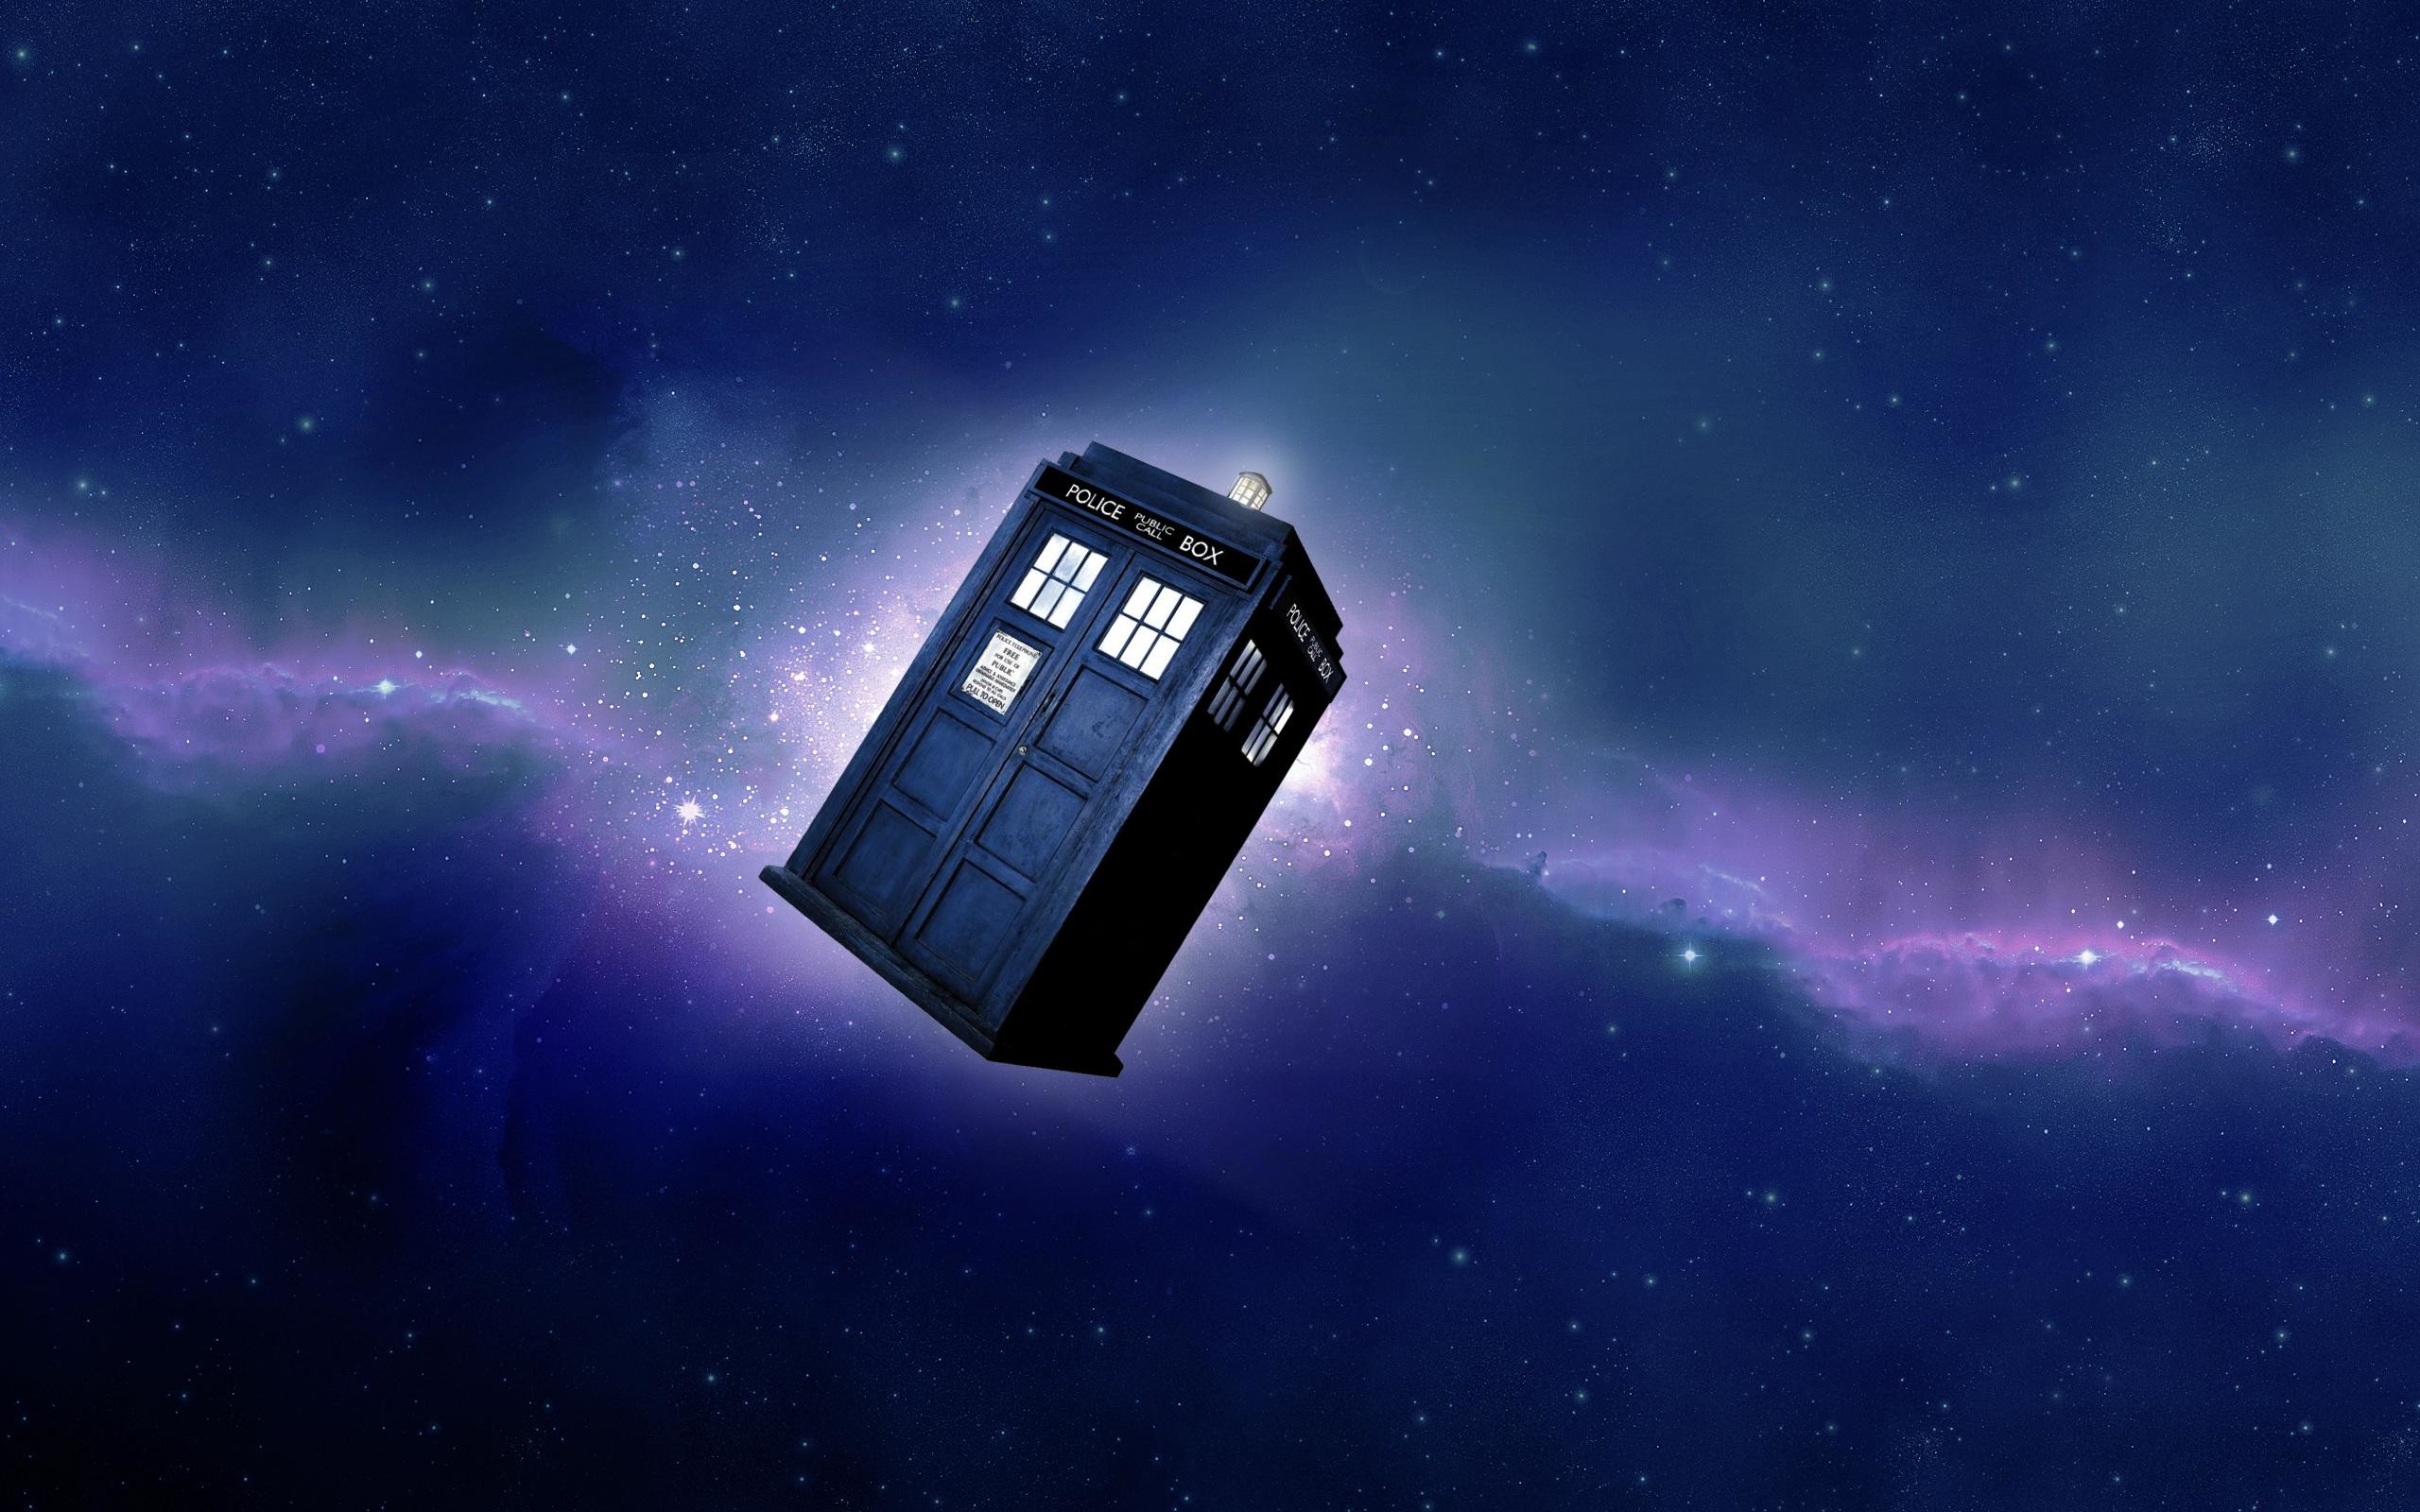 2560x1600 best ideas about Doctor who wallpaper on Pinterest Tardis